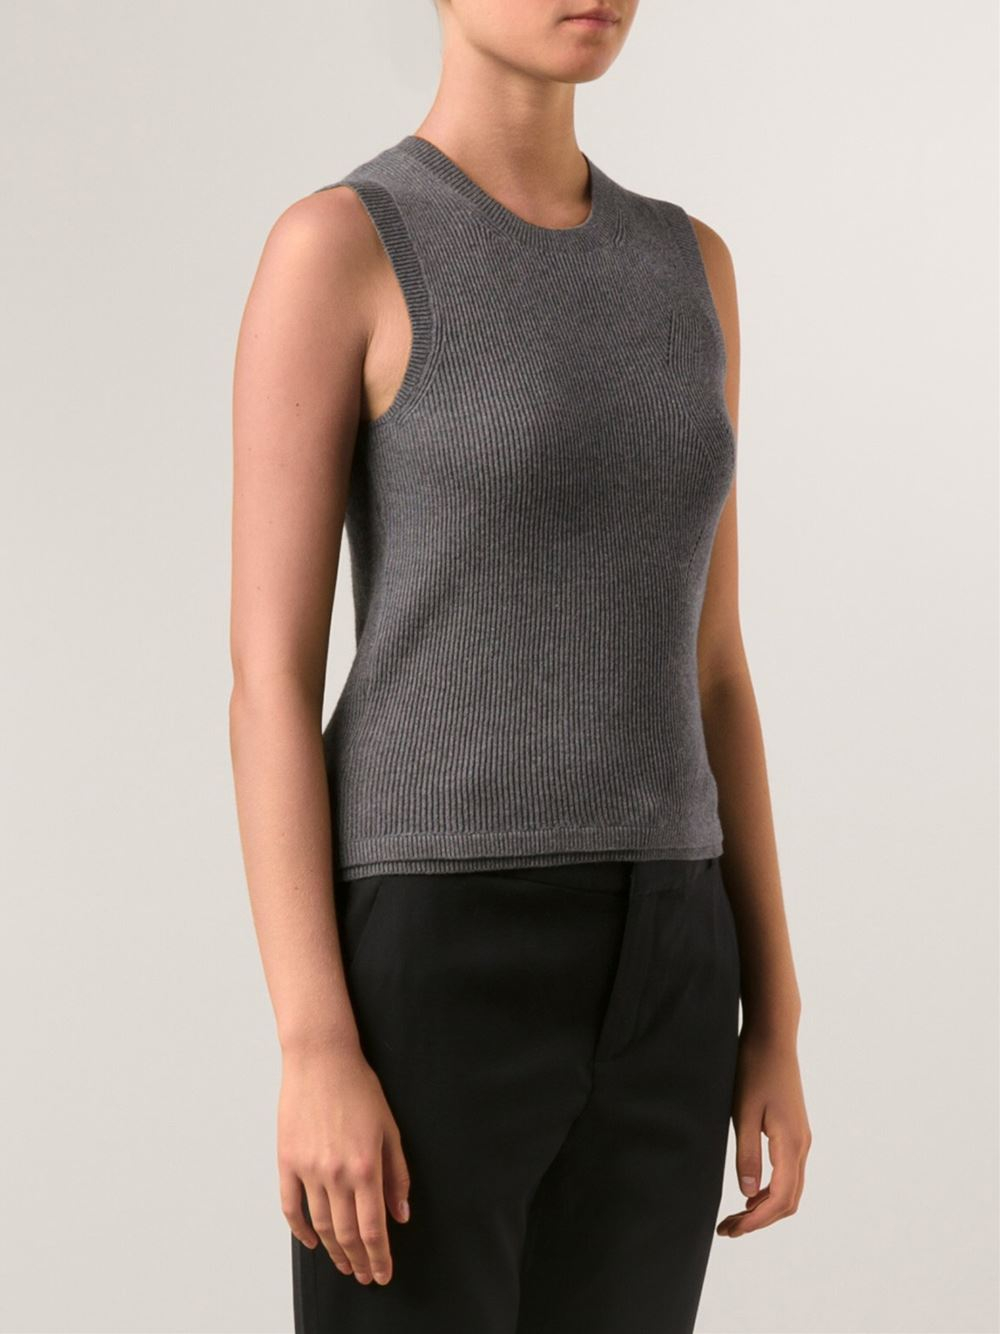 L'Agence Shell Top in Grey (Gray) - Lyst